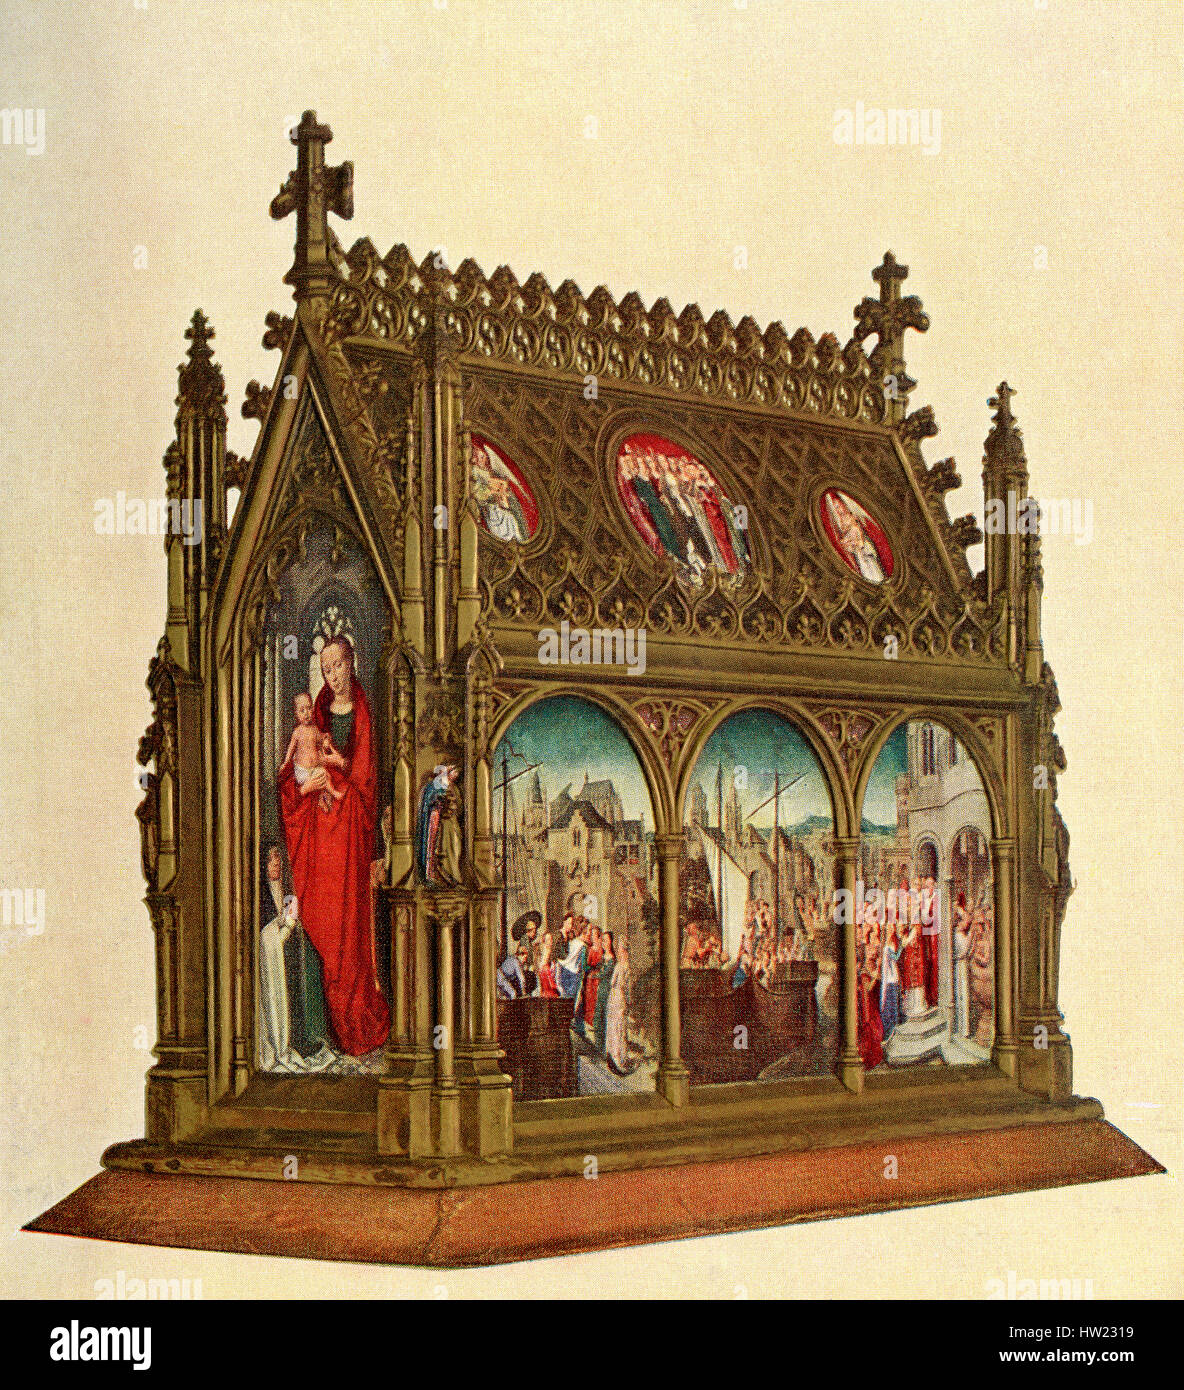 Virgin and Child, reverse of the Reliquary of Saint Ursula. The reliquary of Ursula was commissioned to Memling by the monastic community of Saint John Hospital, where the saint was the subject of special devotion. The wooden reliquary is made in the form of a chapel with a roof bâtière and shows Ursula protecting the virgins, and arriving at Cologne, Basel and Rome. Stock Photo